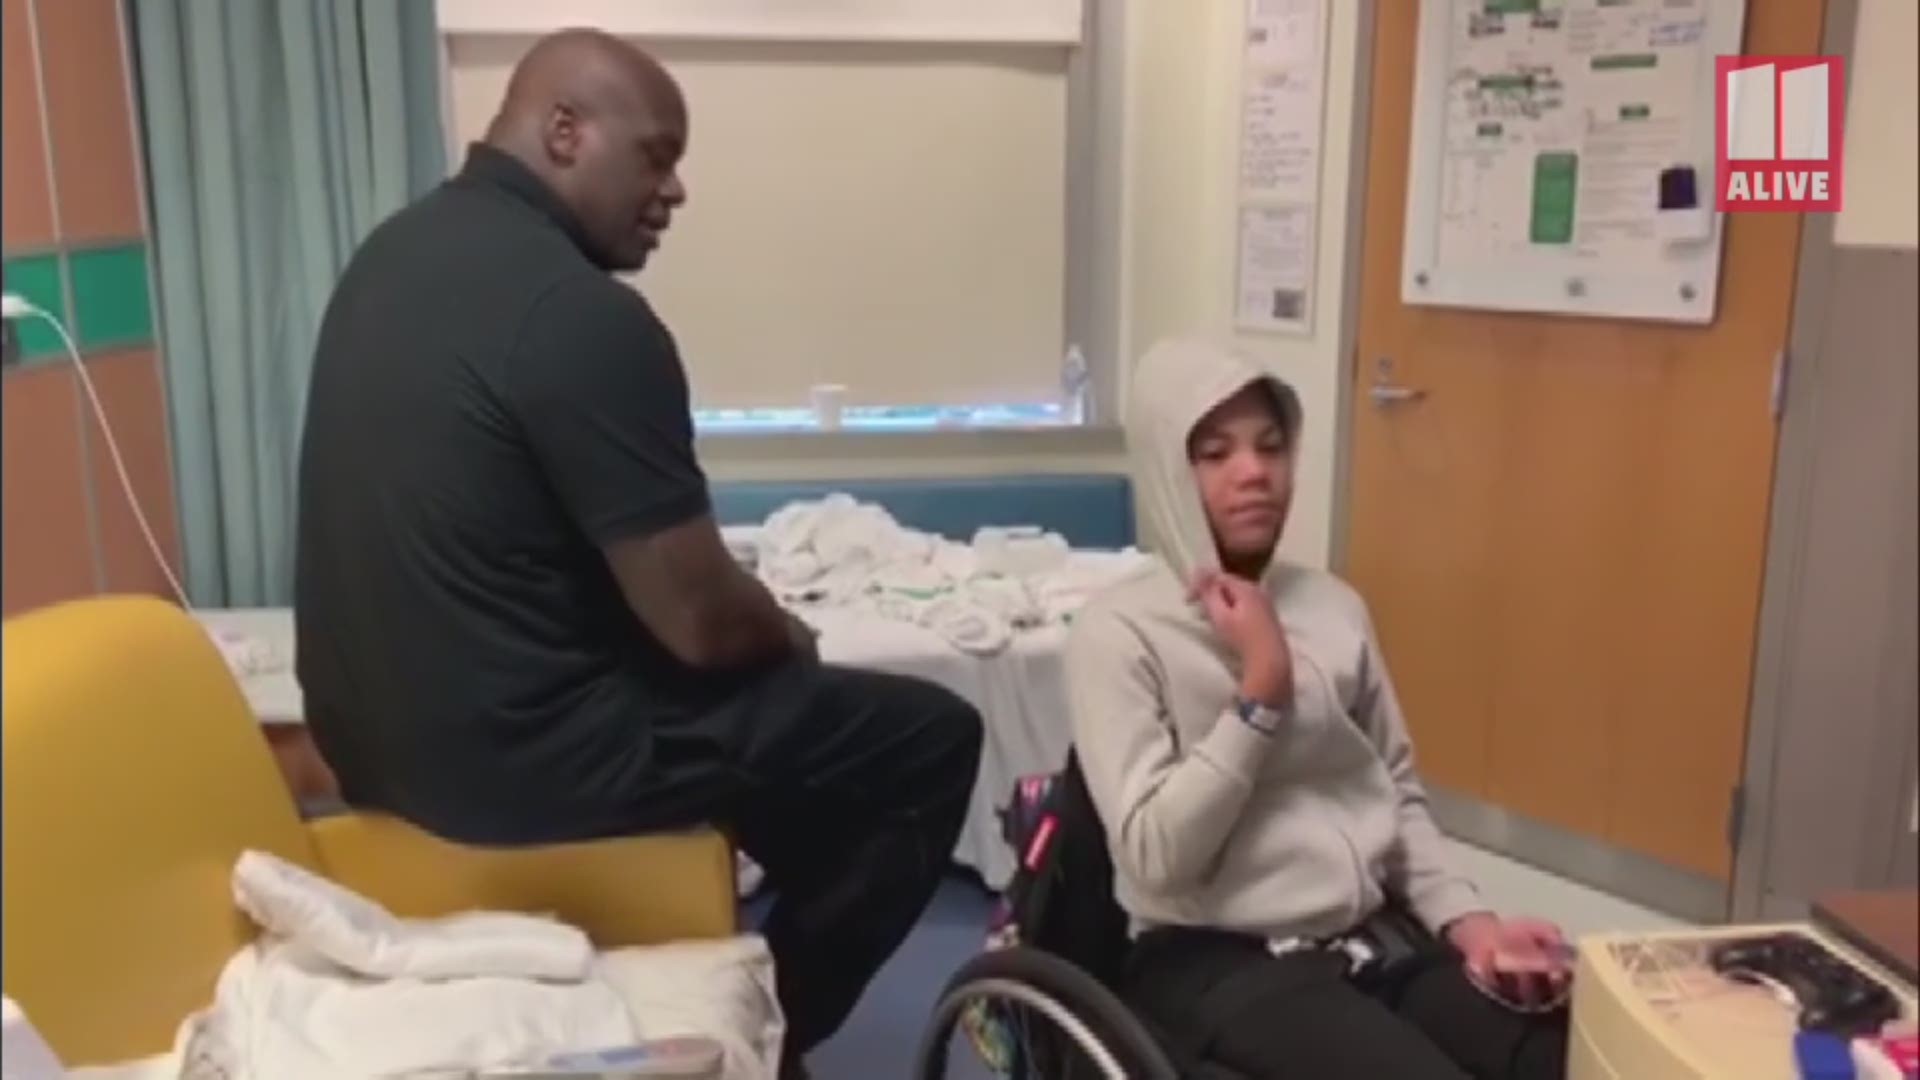 Shaquille O'Neal visits with 12-year-old Isaiah Payton at the hospital. A bullet has struck Isaiah's spine, leaving him unable to walk.